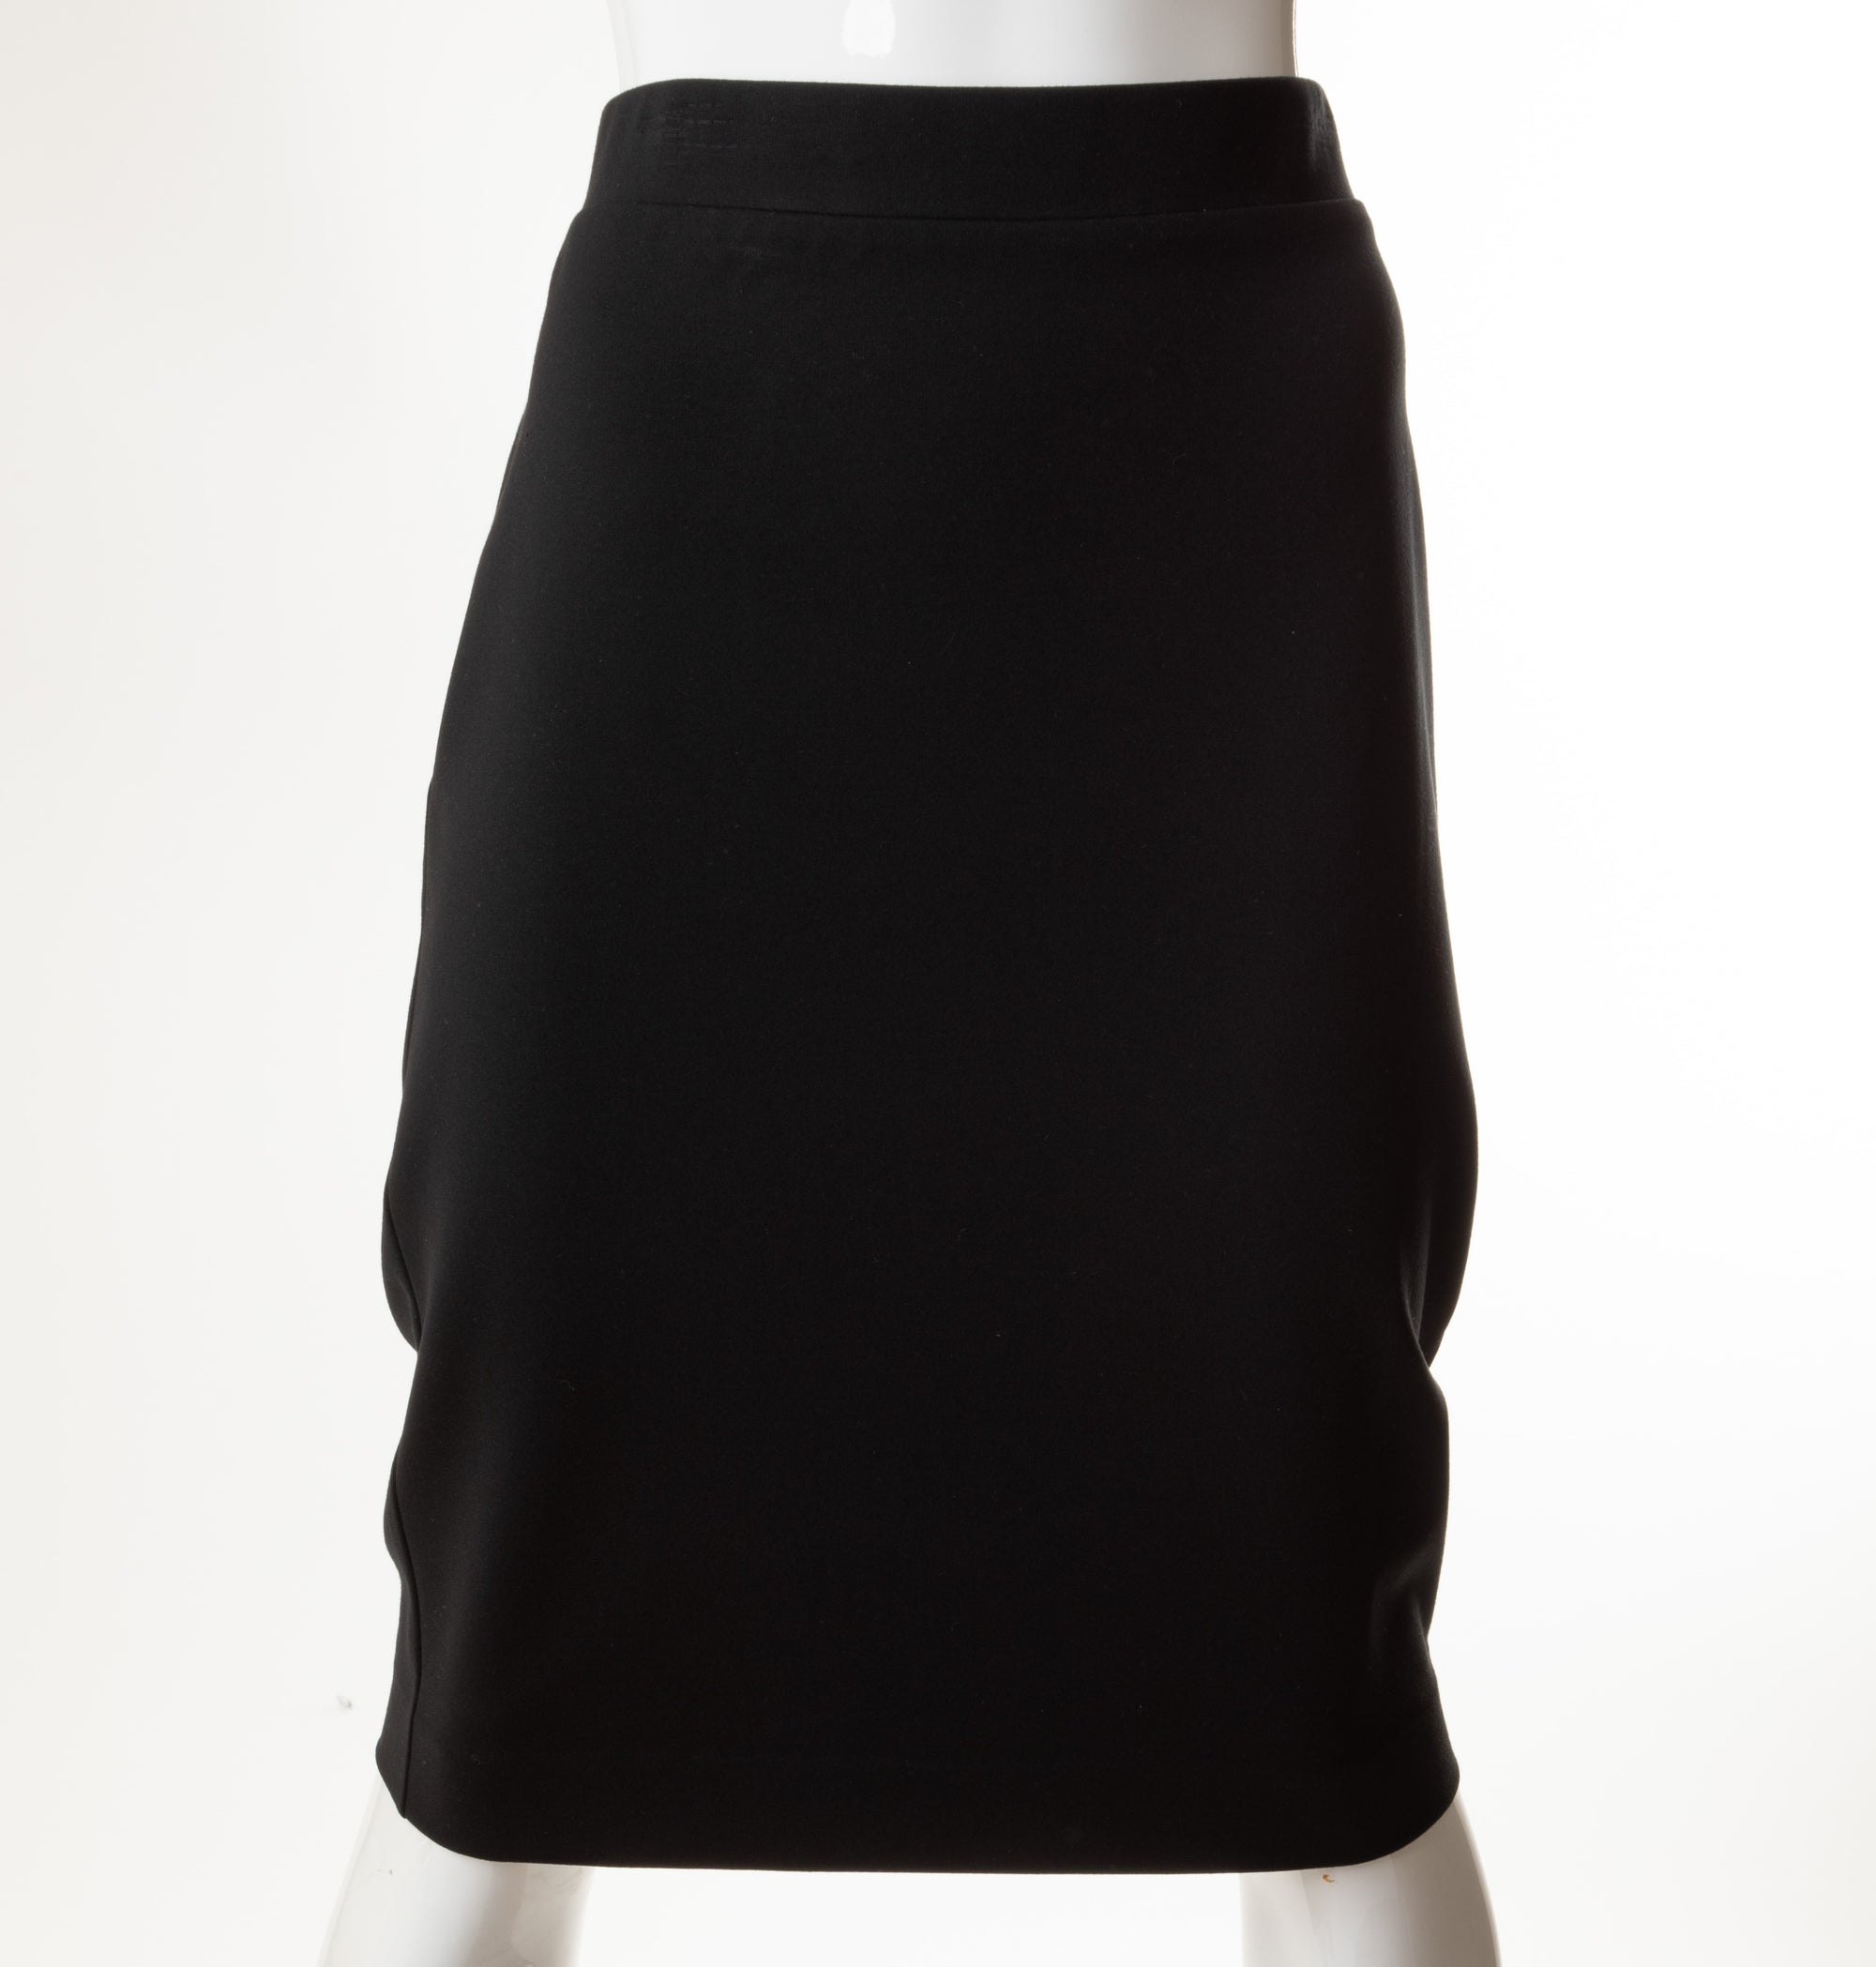 WEAR AND FLAIR PULL ON PONTE PENCIL SKIRT 25" BLACK